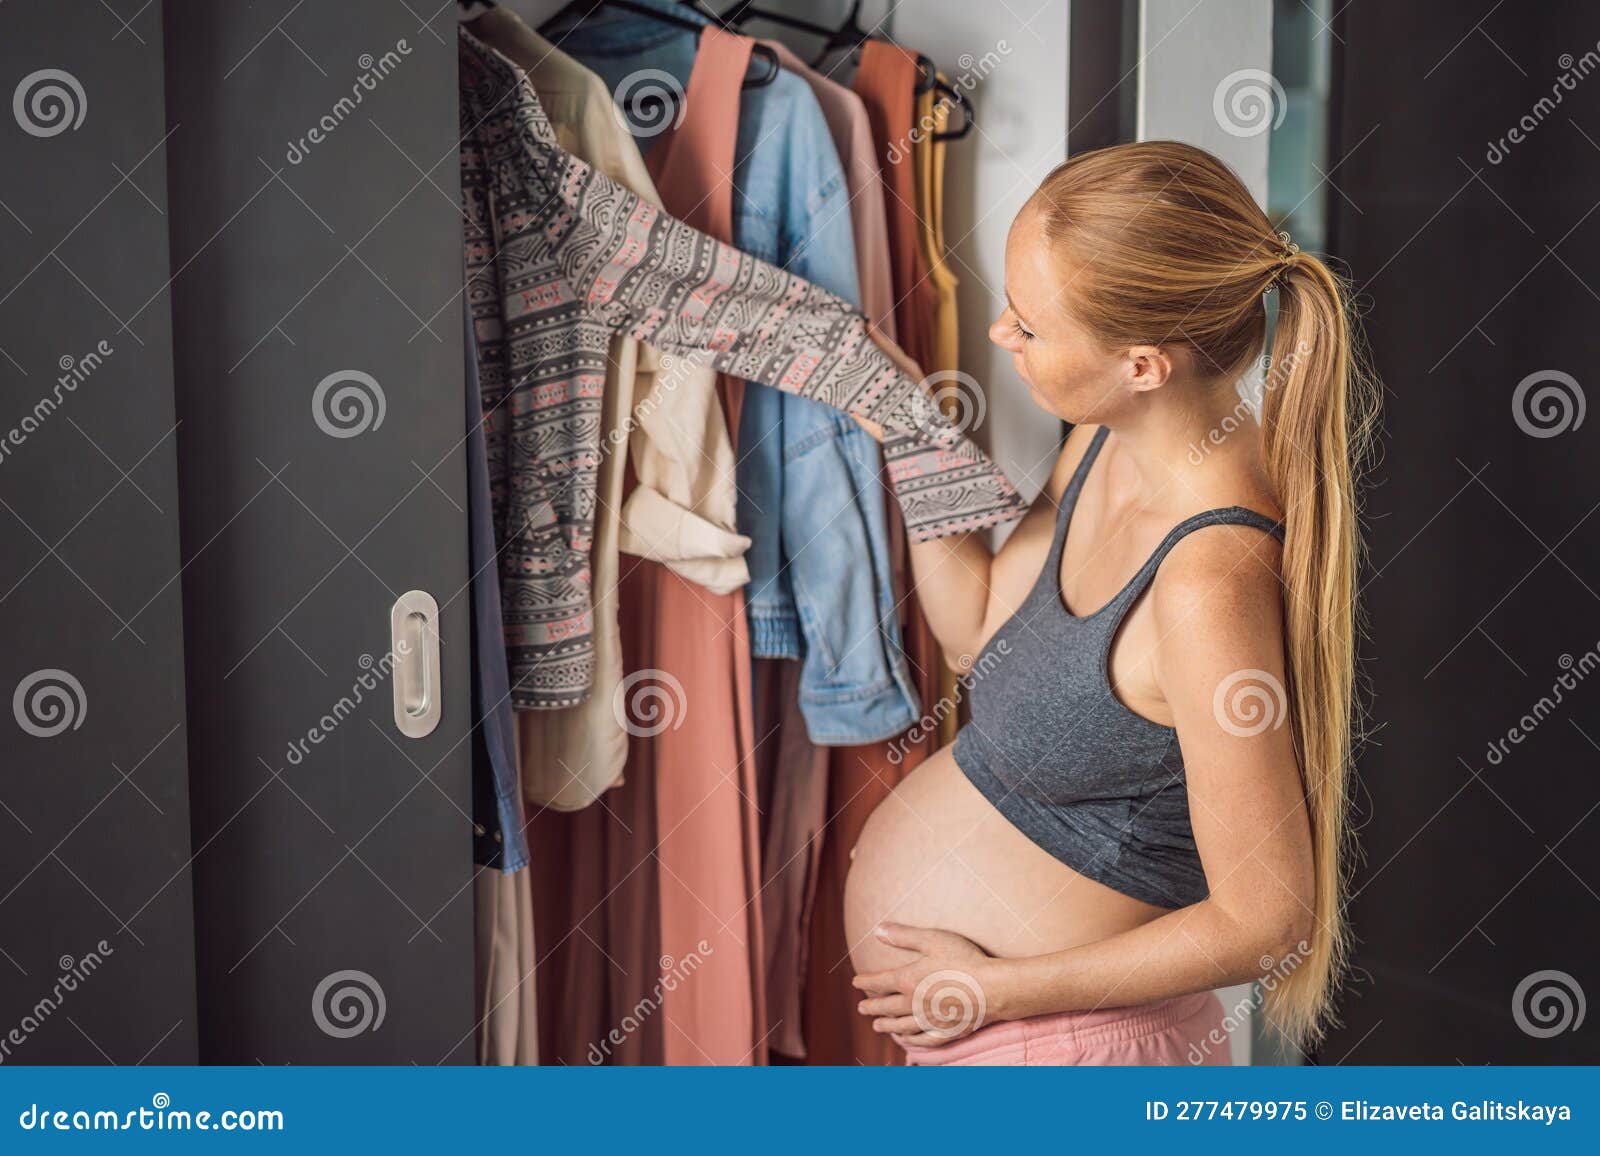 A Pregnant Woman Has Nothing To Wear. a Pregnant Woman Stands in Front of a  Closet with Clothes and Does Not Know What Stock Image - Image of clothing,  scarf: 277479975